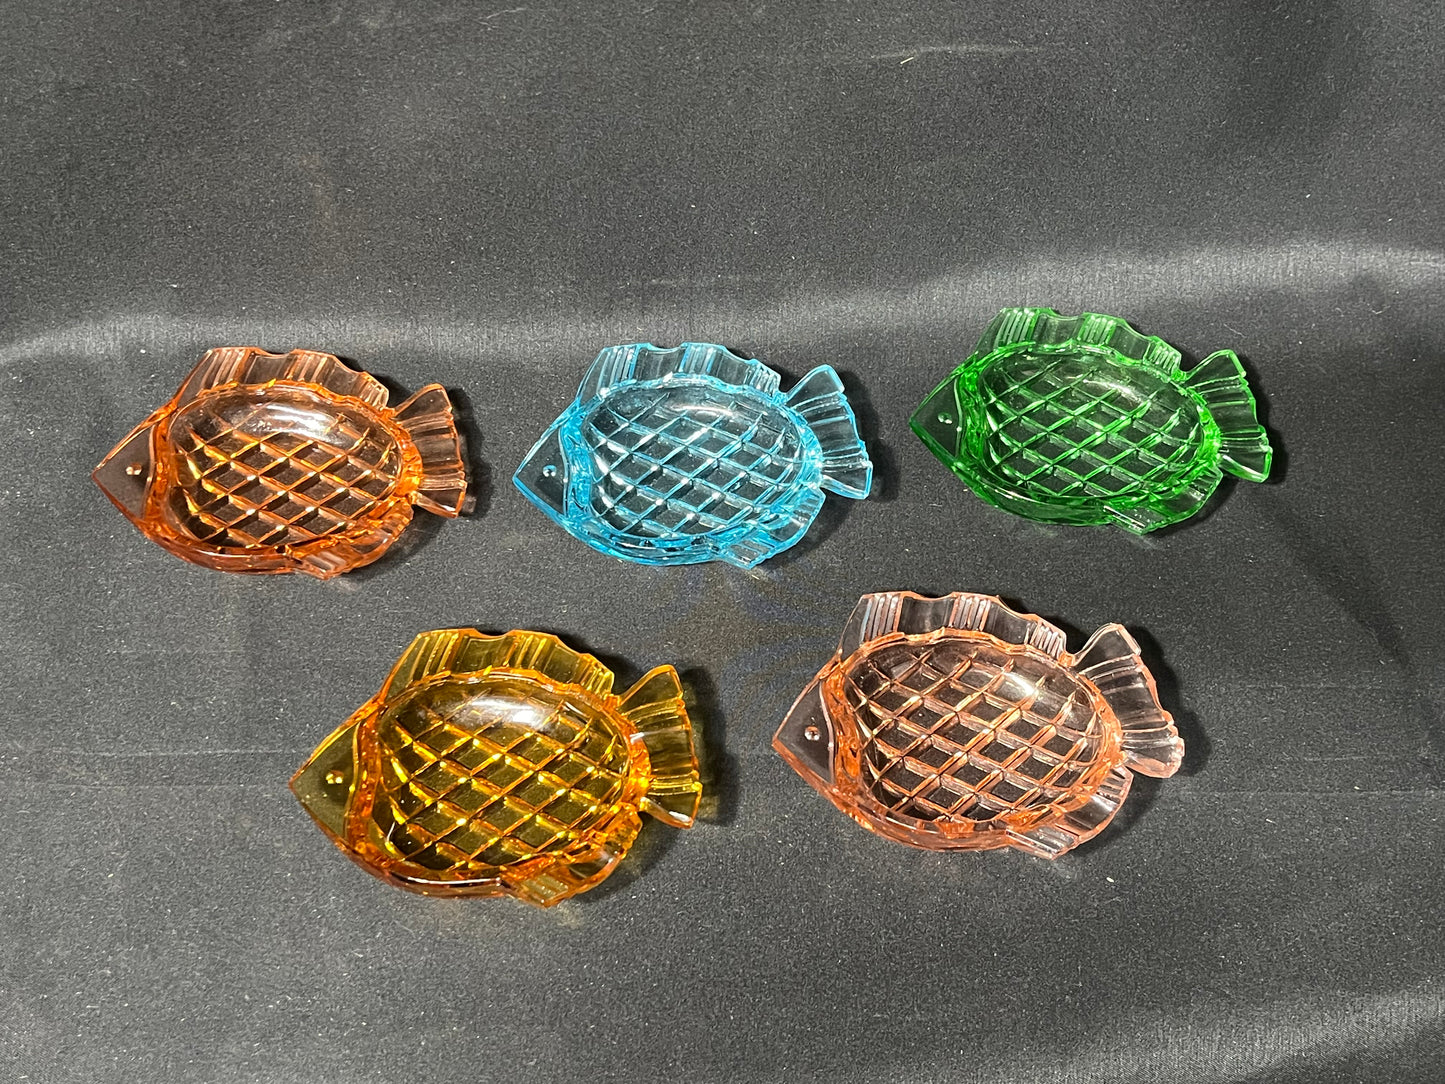 Coloured Glass Ash Tray Fish Shaped - Green, Blue, Orange, Pink